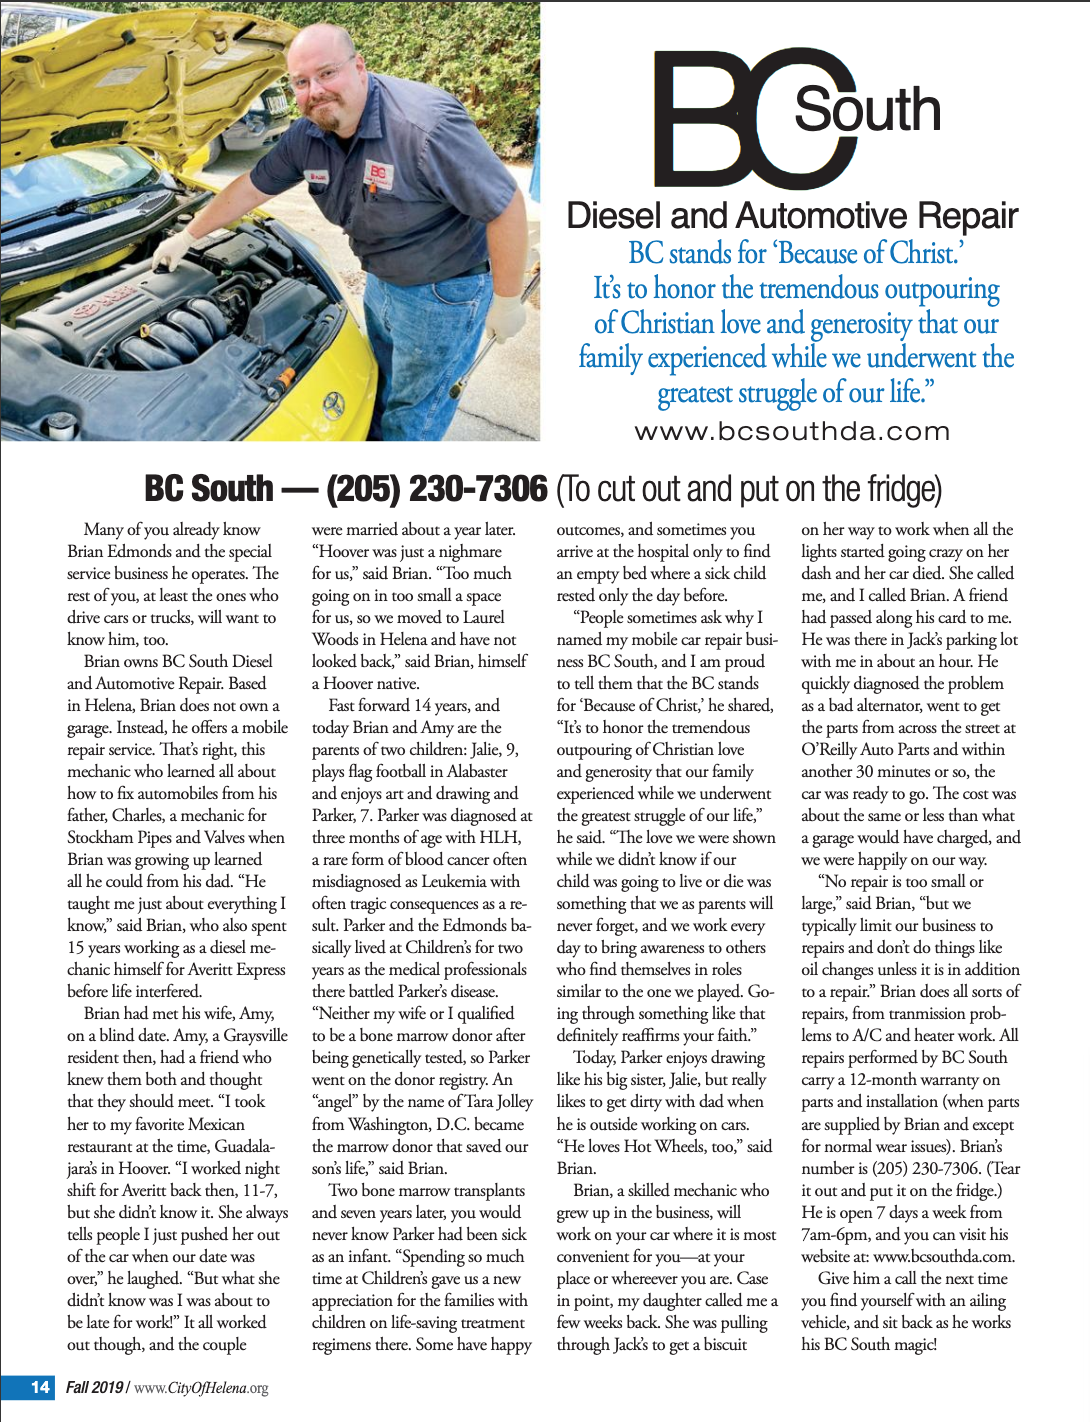 Picture of BC South Diesel and Automotive Repair in the Helena City News Magazine